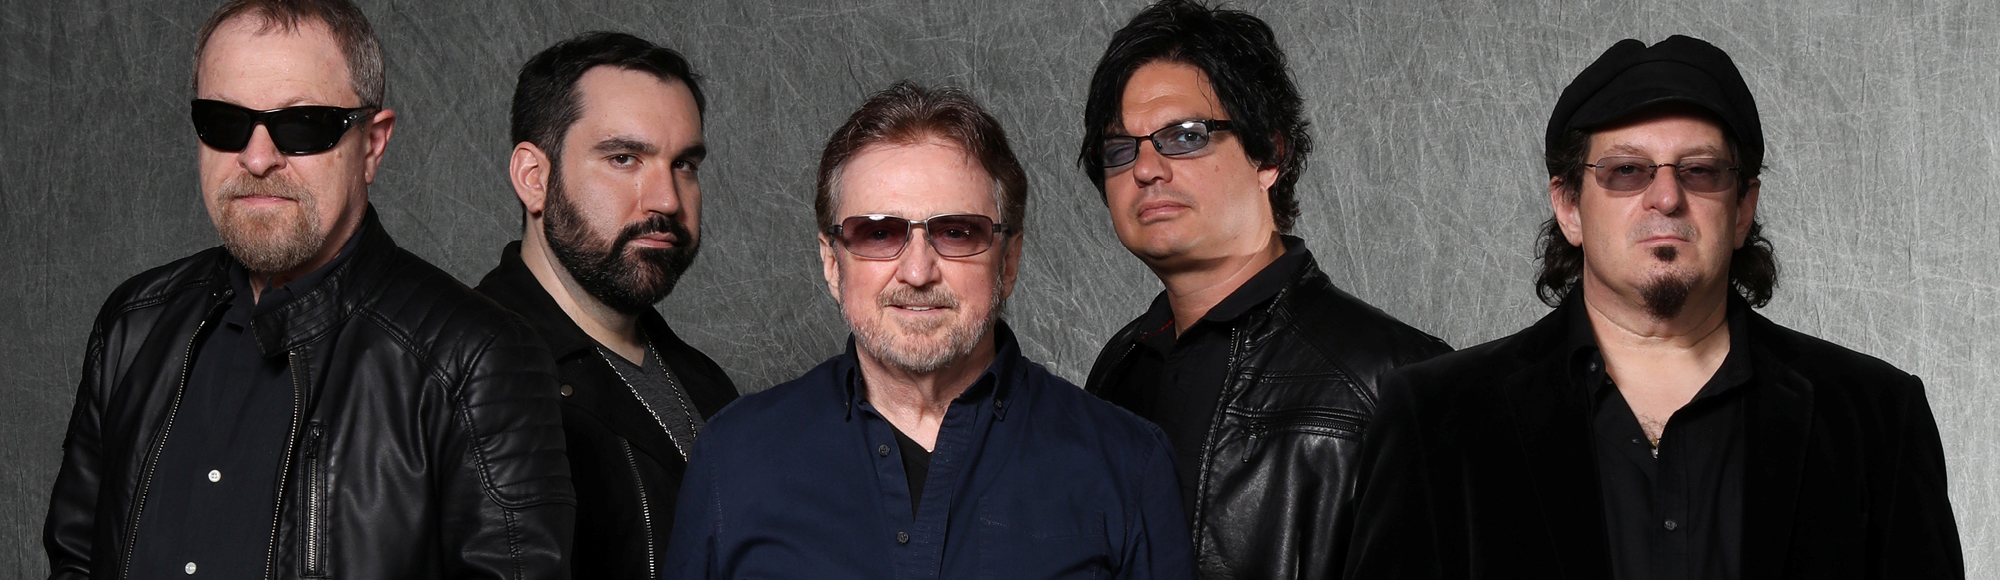 Blue Oyster Cult show